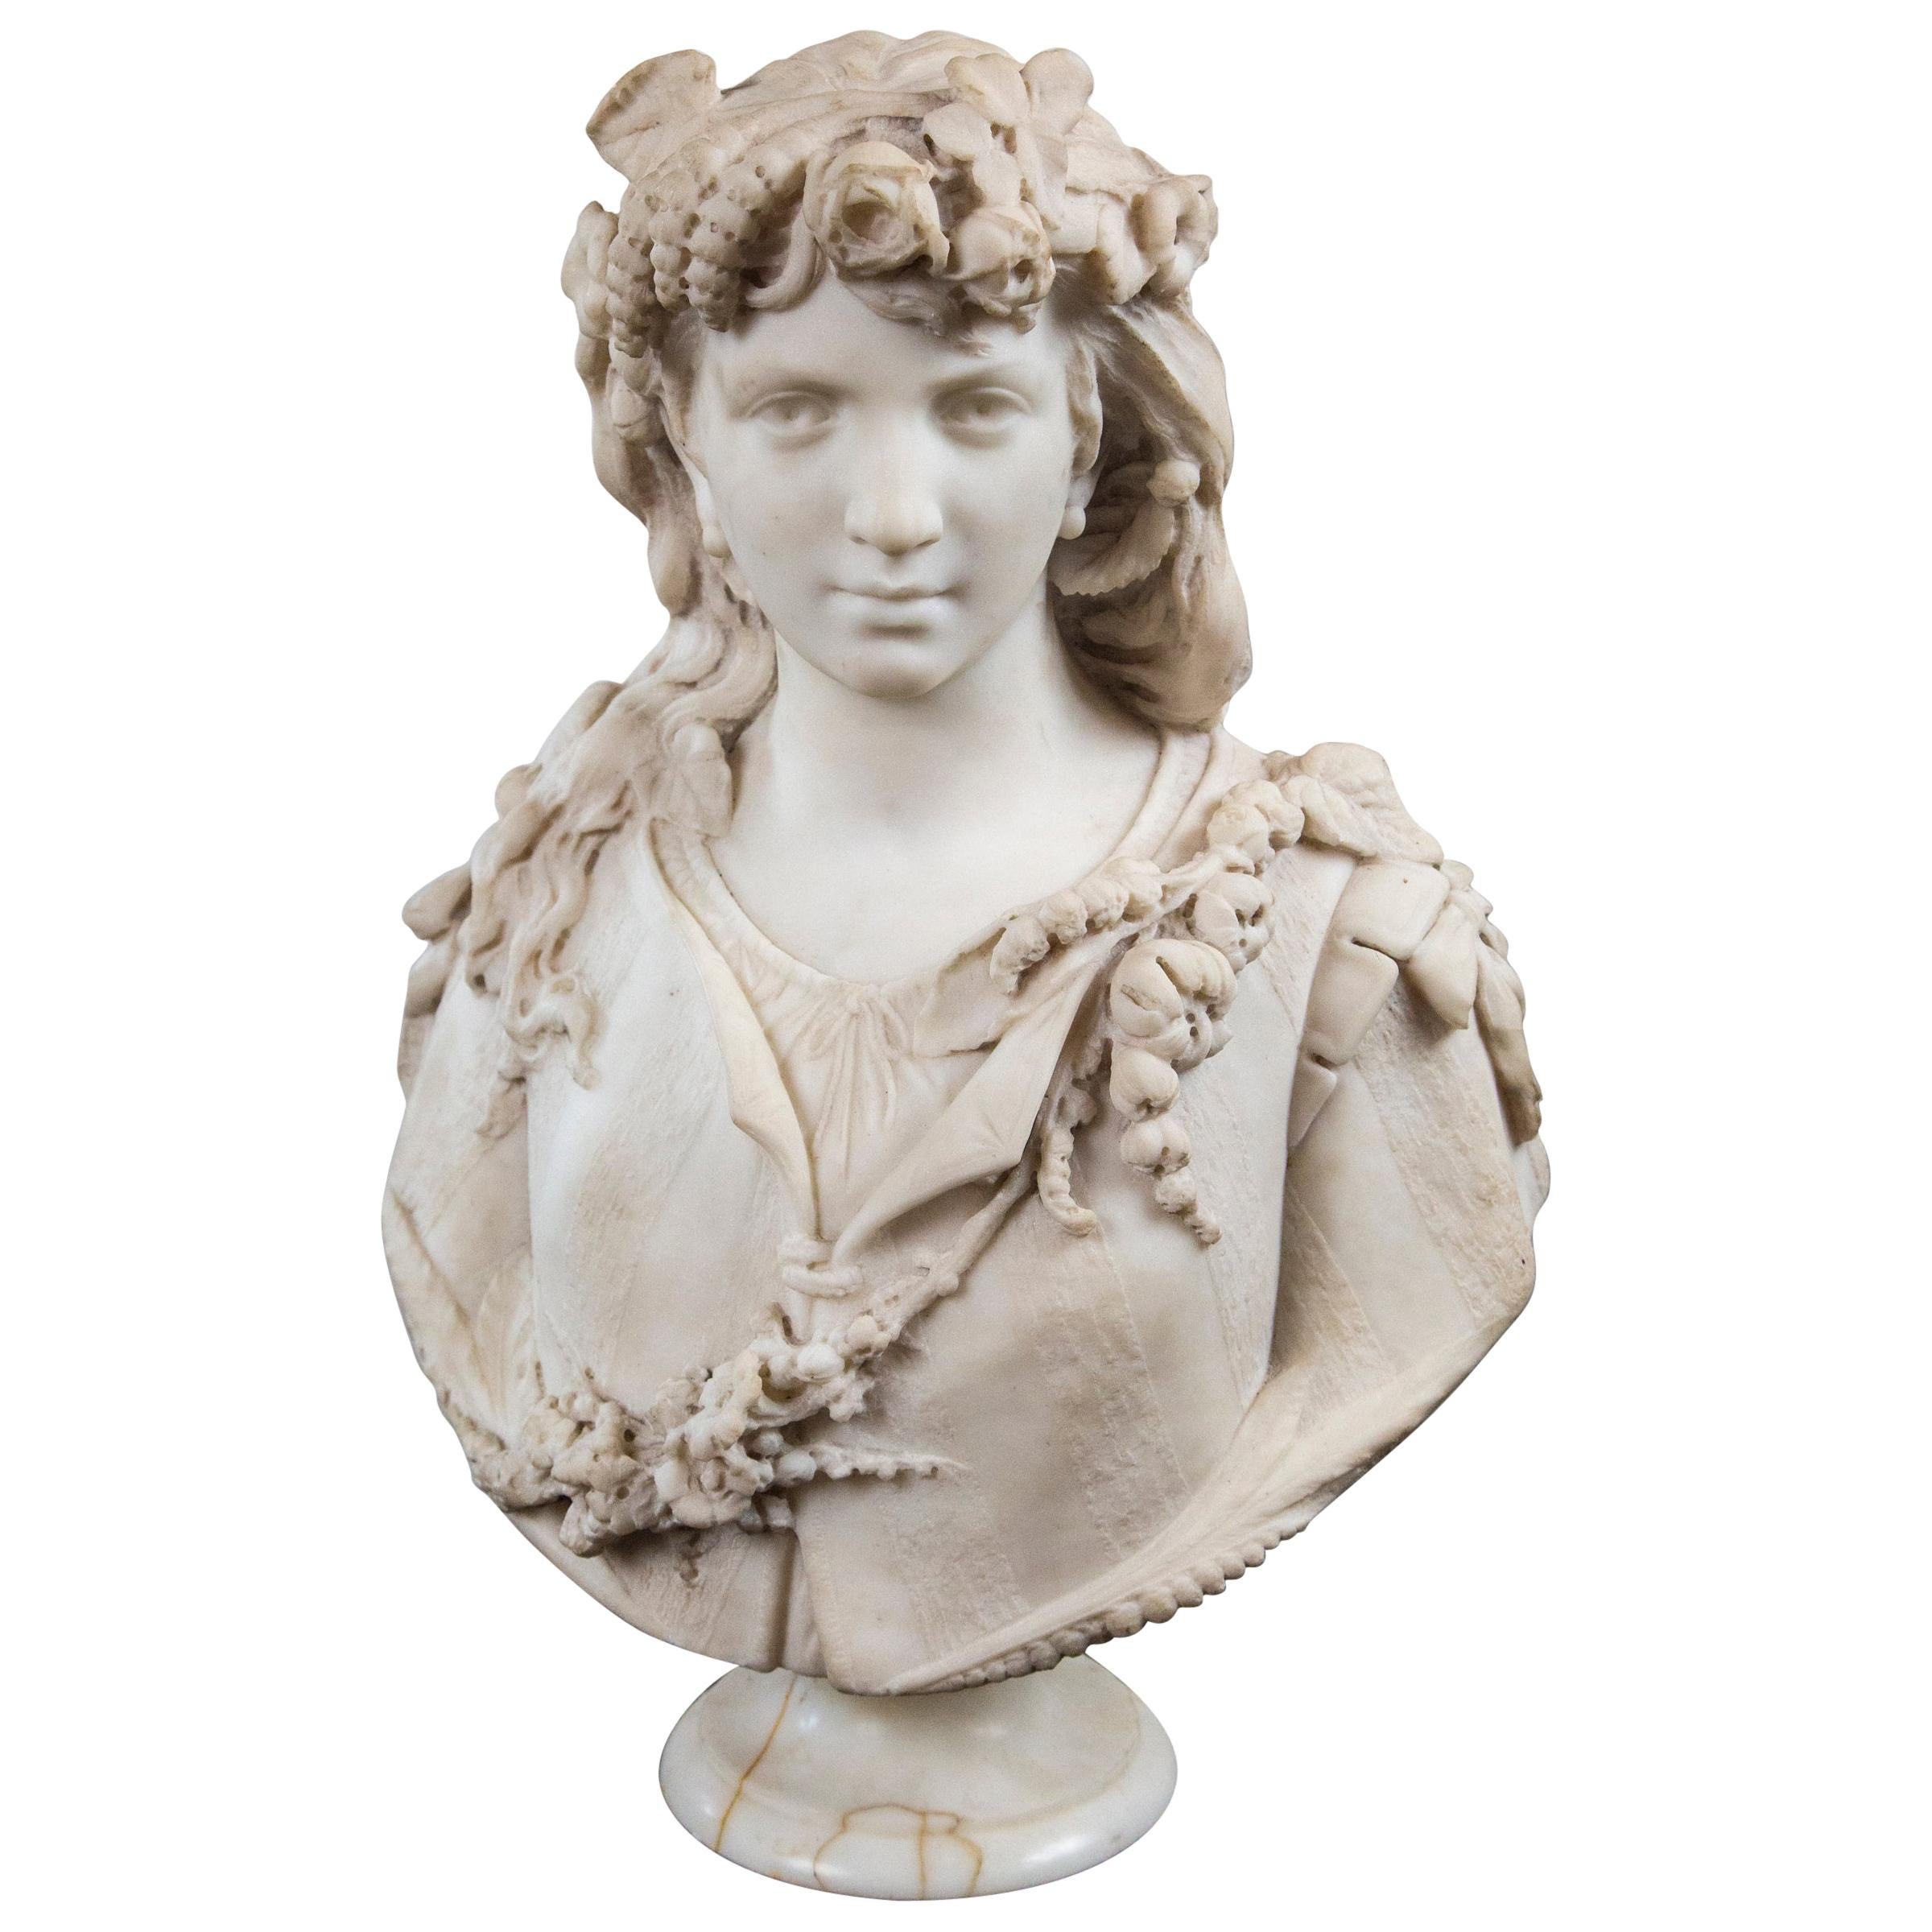 https://a.1stdibscdn.com/large-white-marble-bust-of-a-woman-for-sale/1121189/f_203630521598707865174/20363052_master.jpg